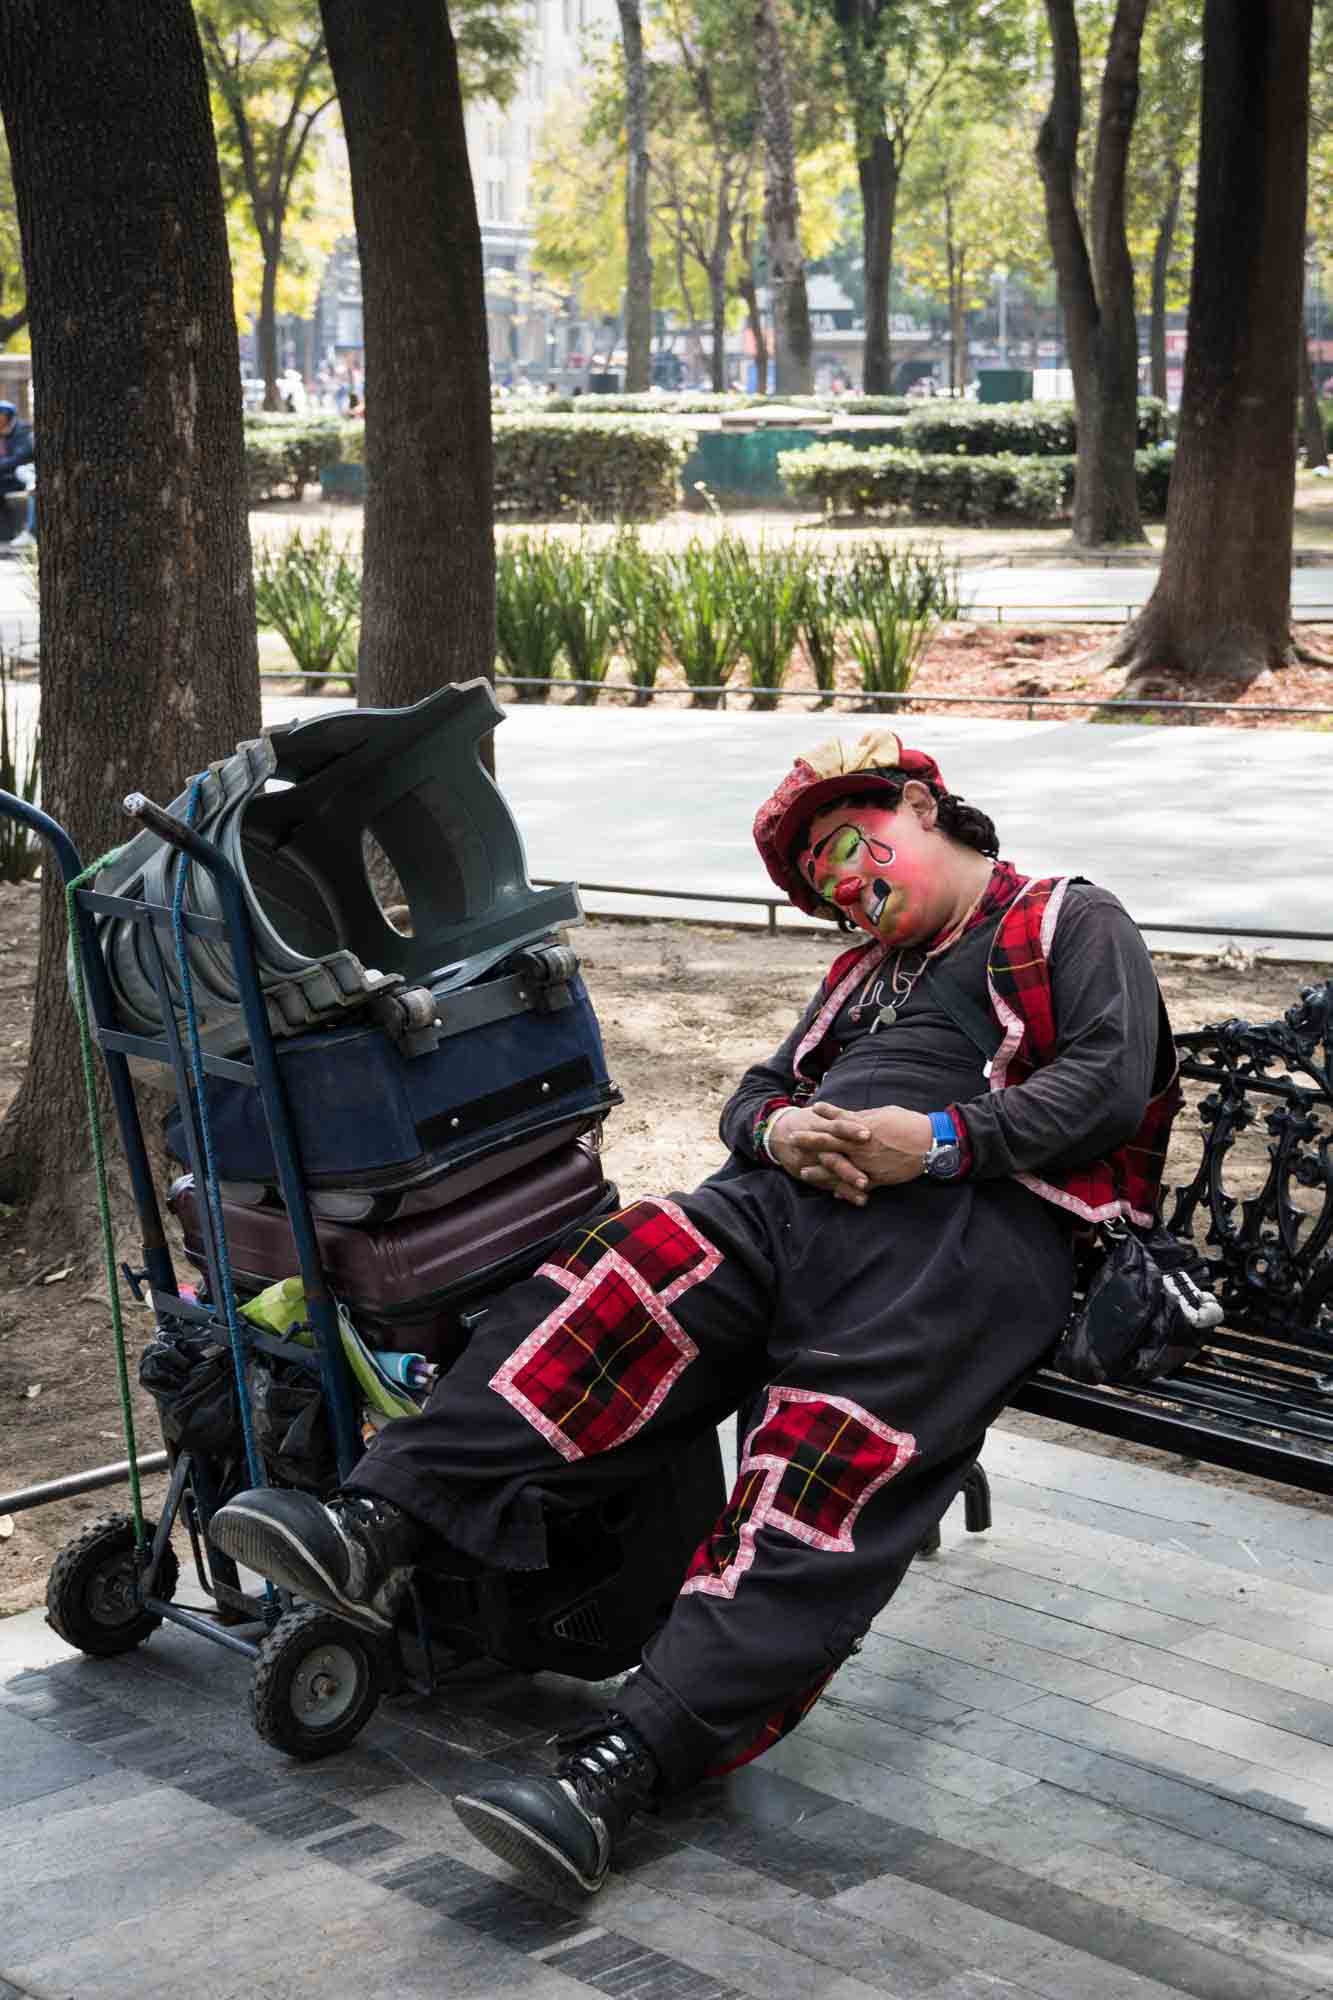 A clown takes a nap on a bench in Alameda Central Park in Mexico City